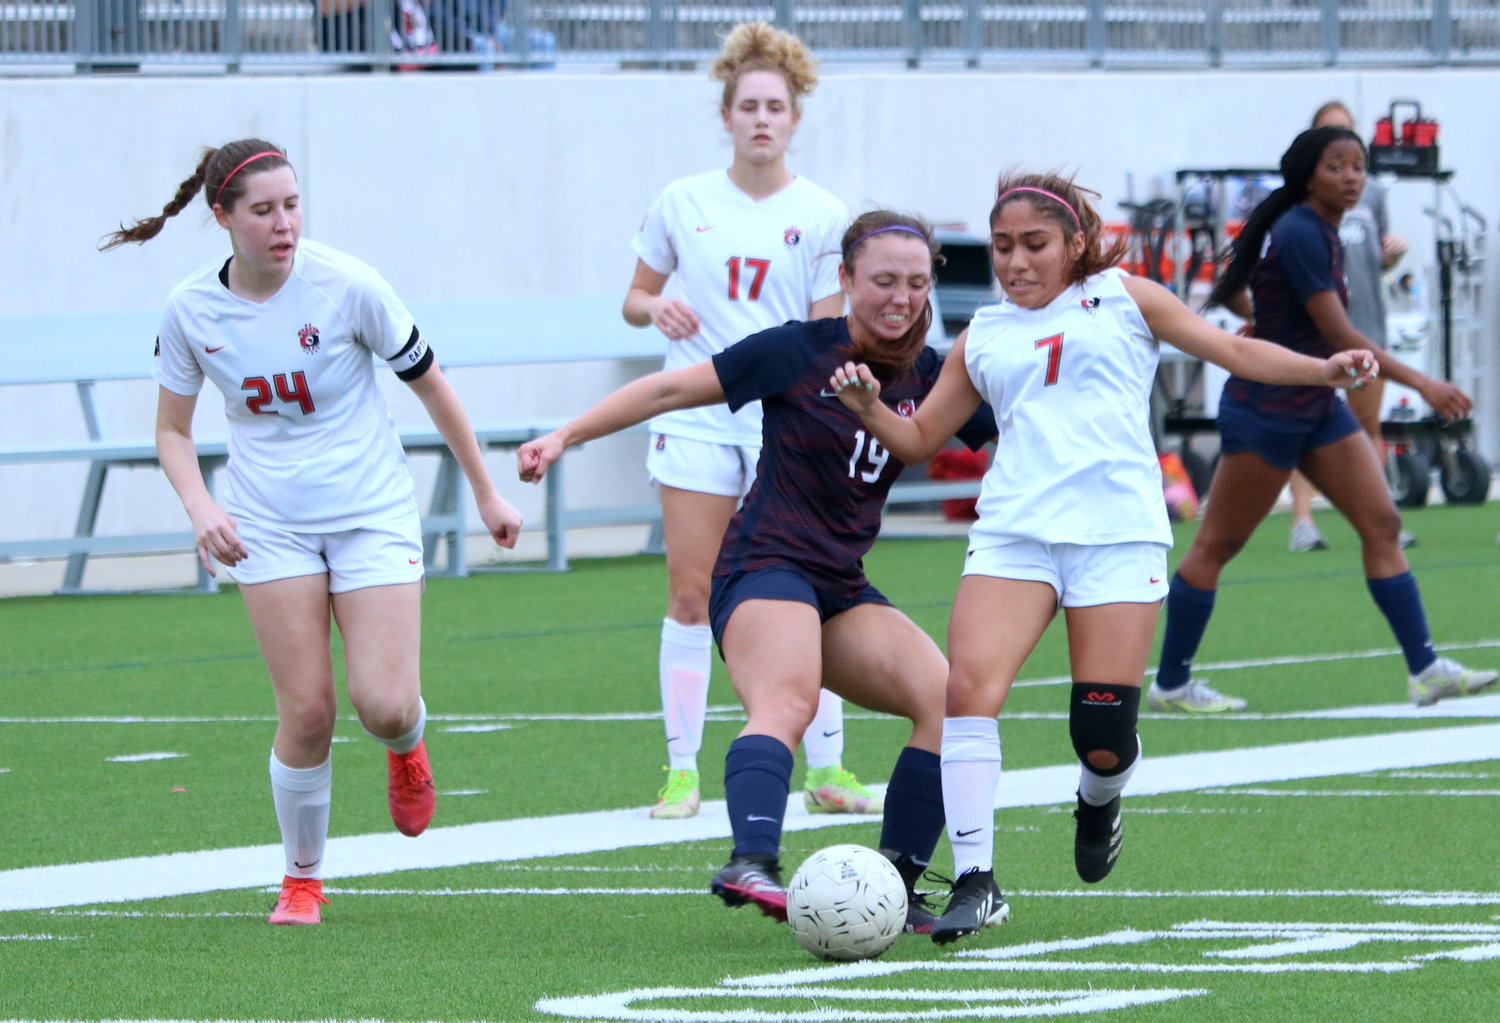 Haven Nail makes a tackle during Tuesday’s Class 6A area round game between Tompkins and Bellaire at Legacy Stadium.